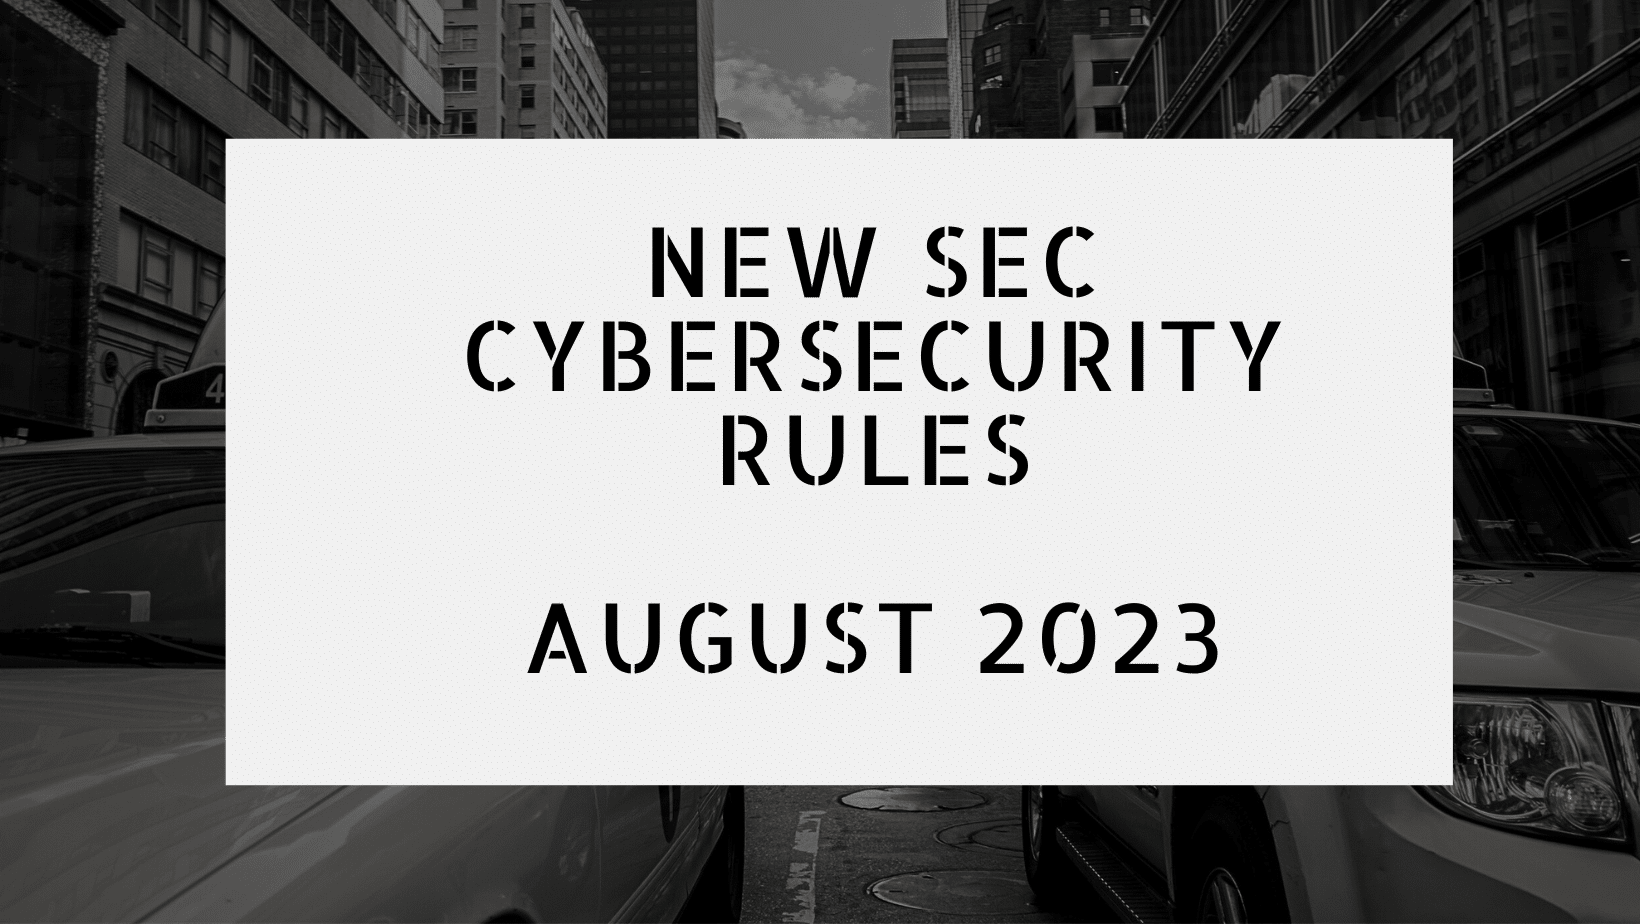 New SEC Cybersecurity Rules